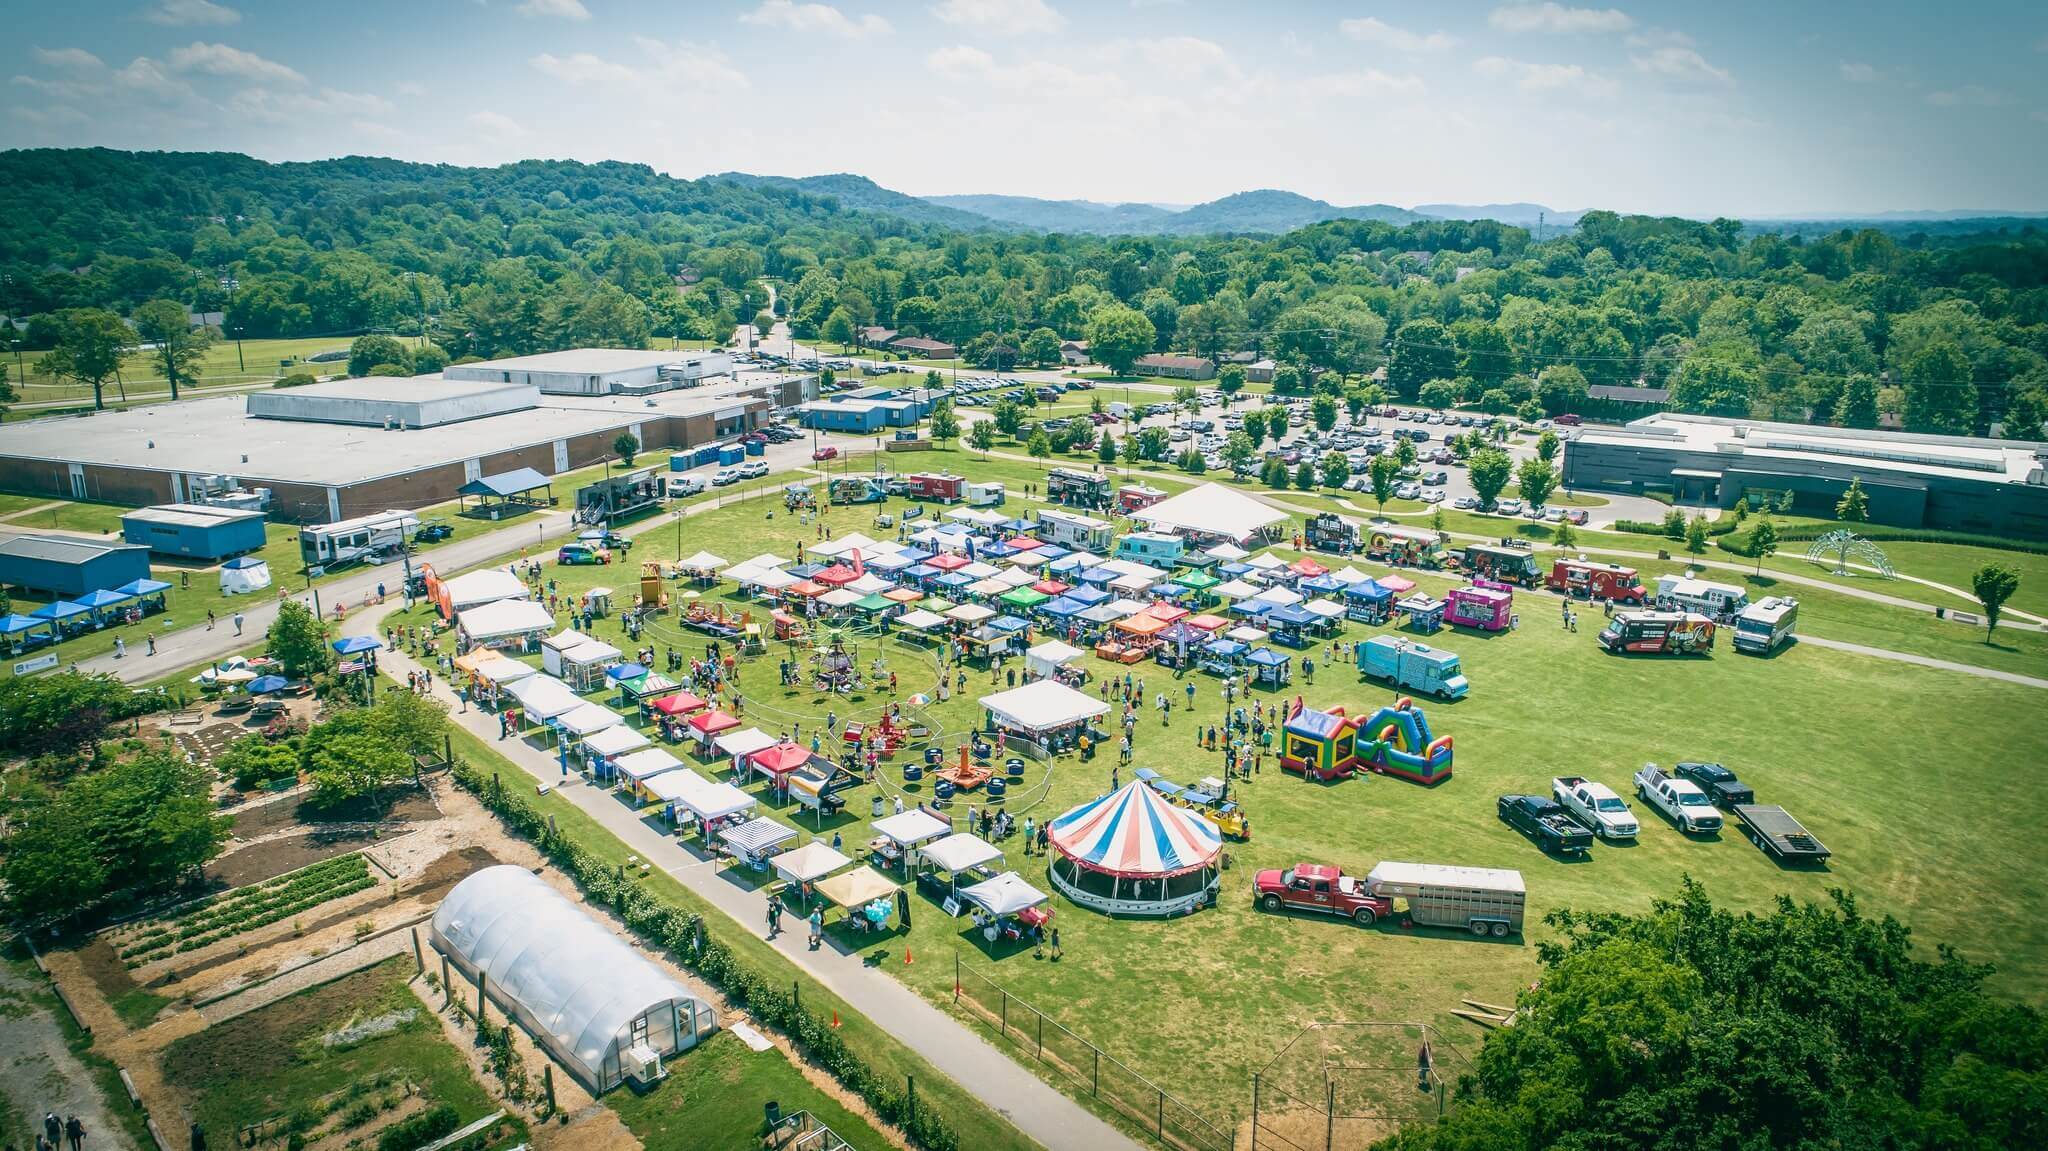 Aerial view of the Bellevue Community Picnic